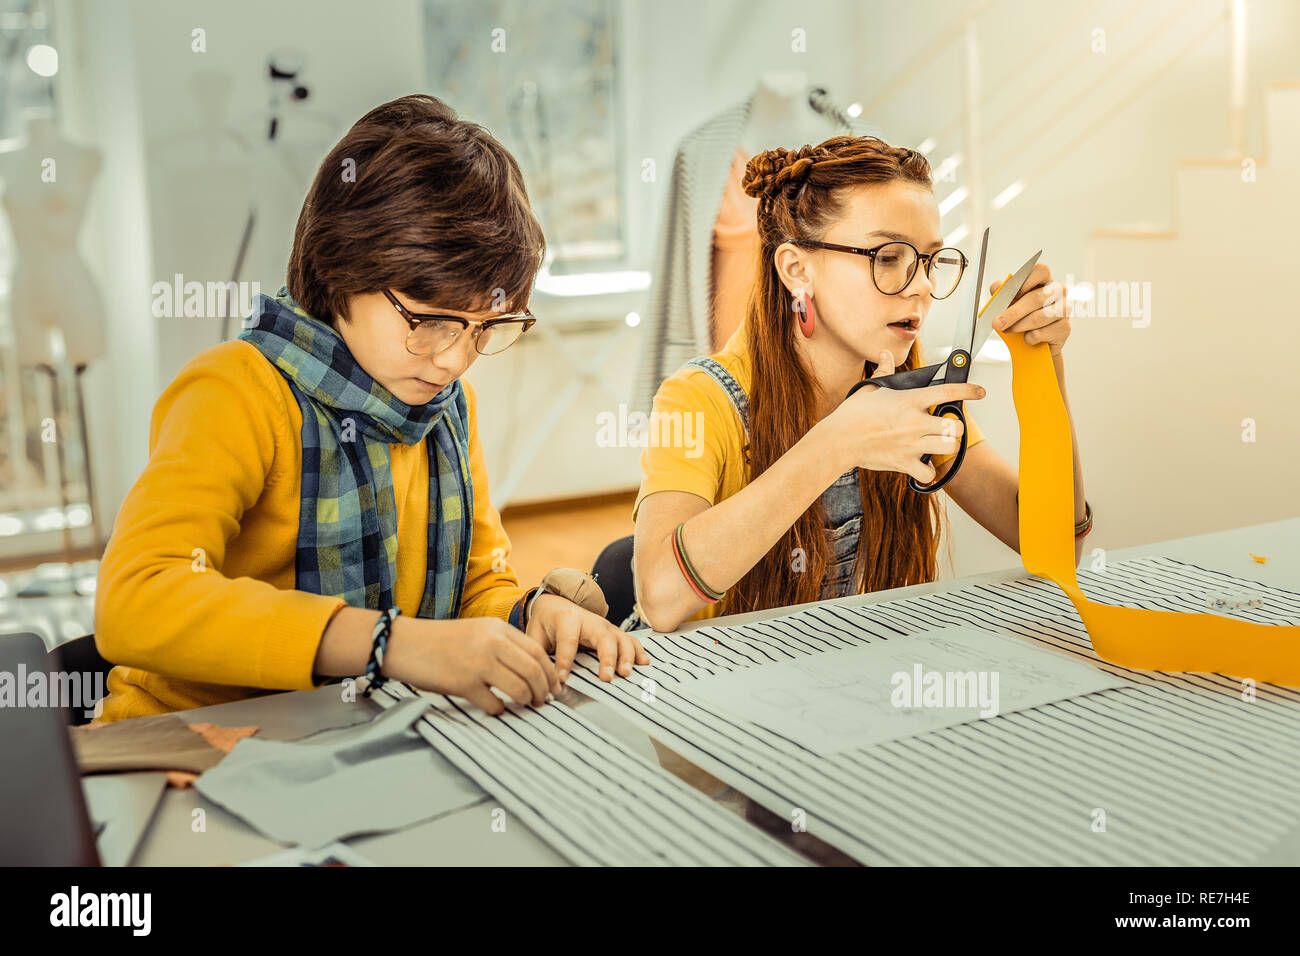 Dark-haired boy using ruler while measuring fabric Stock Photo - Alamy